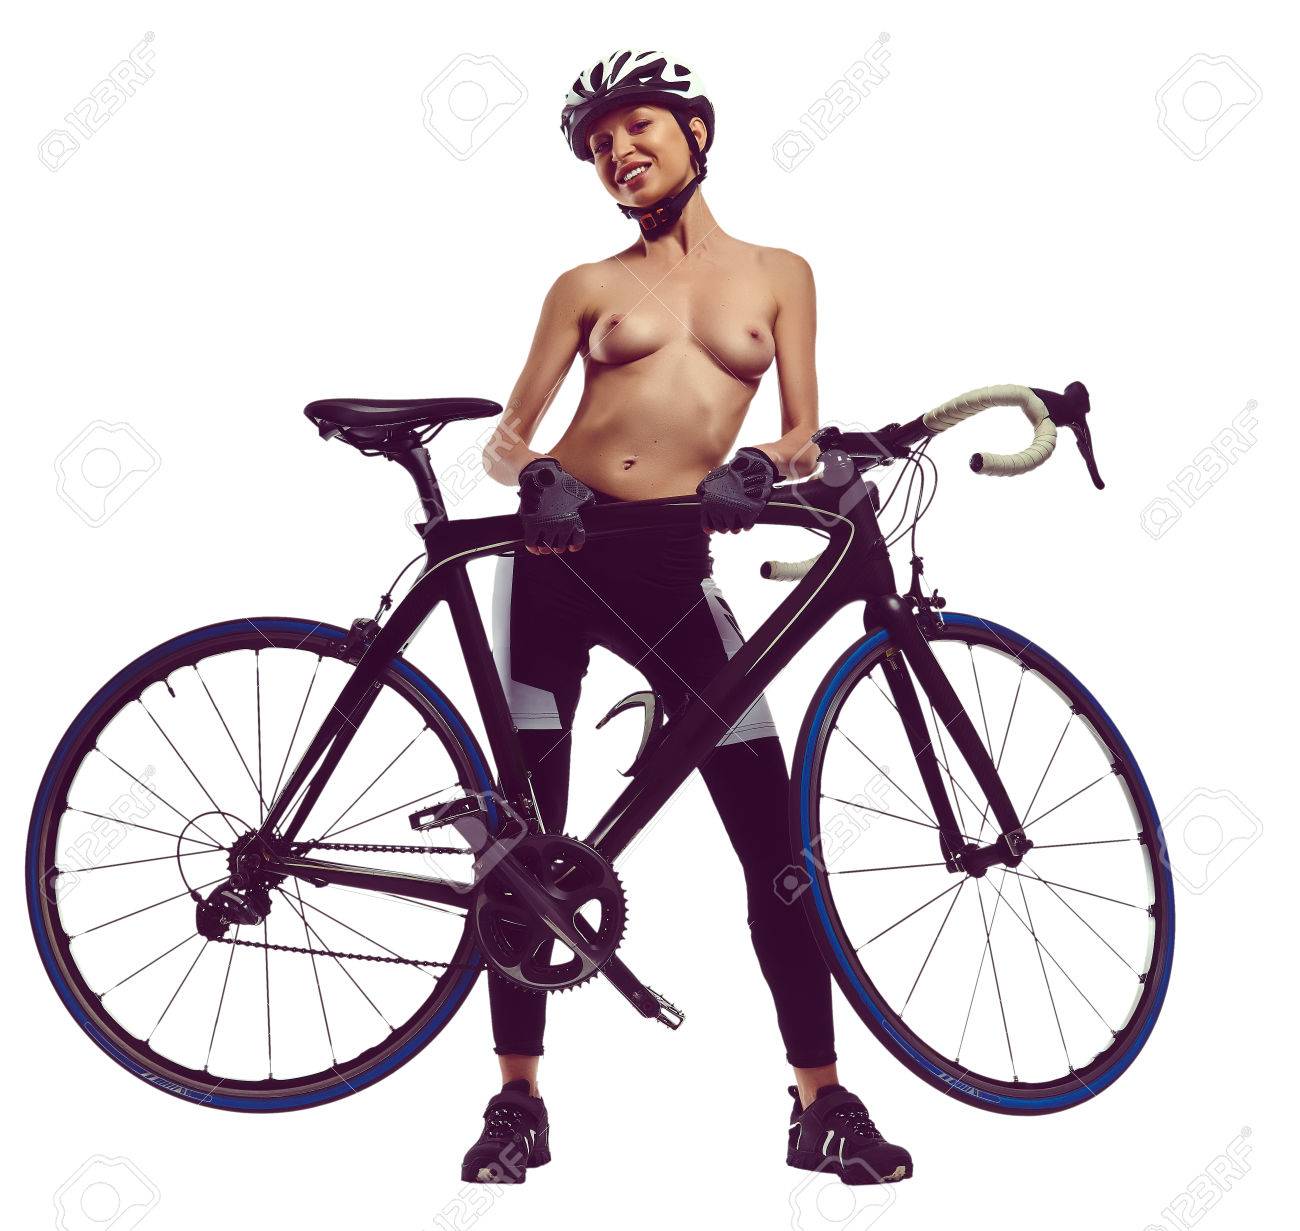 alicia mcinnis recommends Naked Woman On Bike